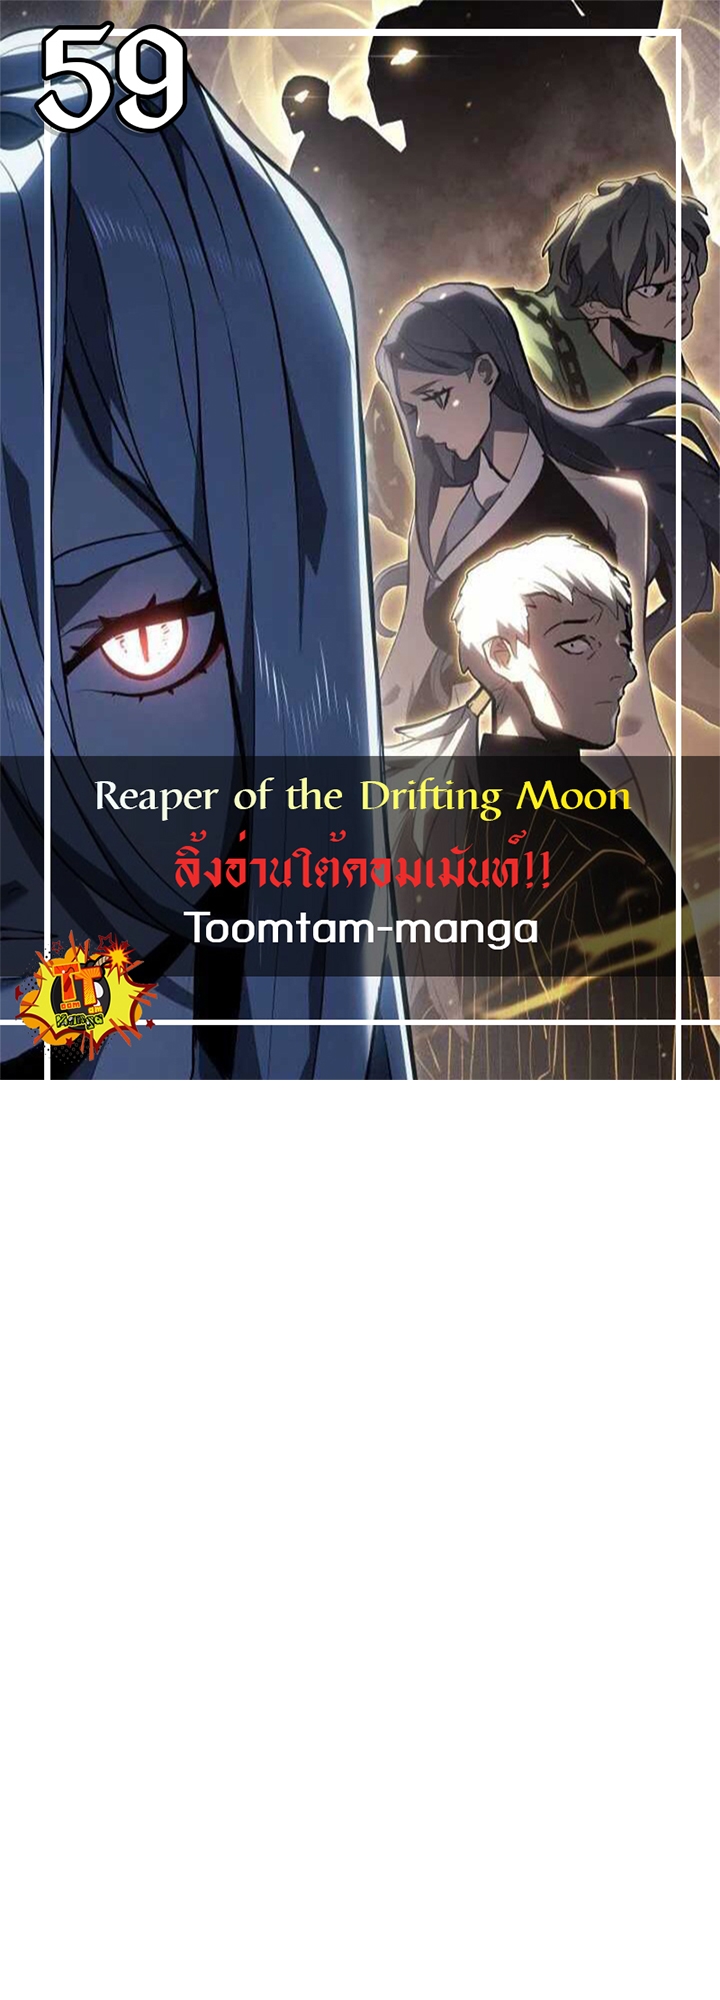 Reaper of the Drifting Moon 59 26 10 660001